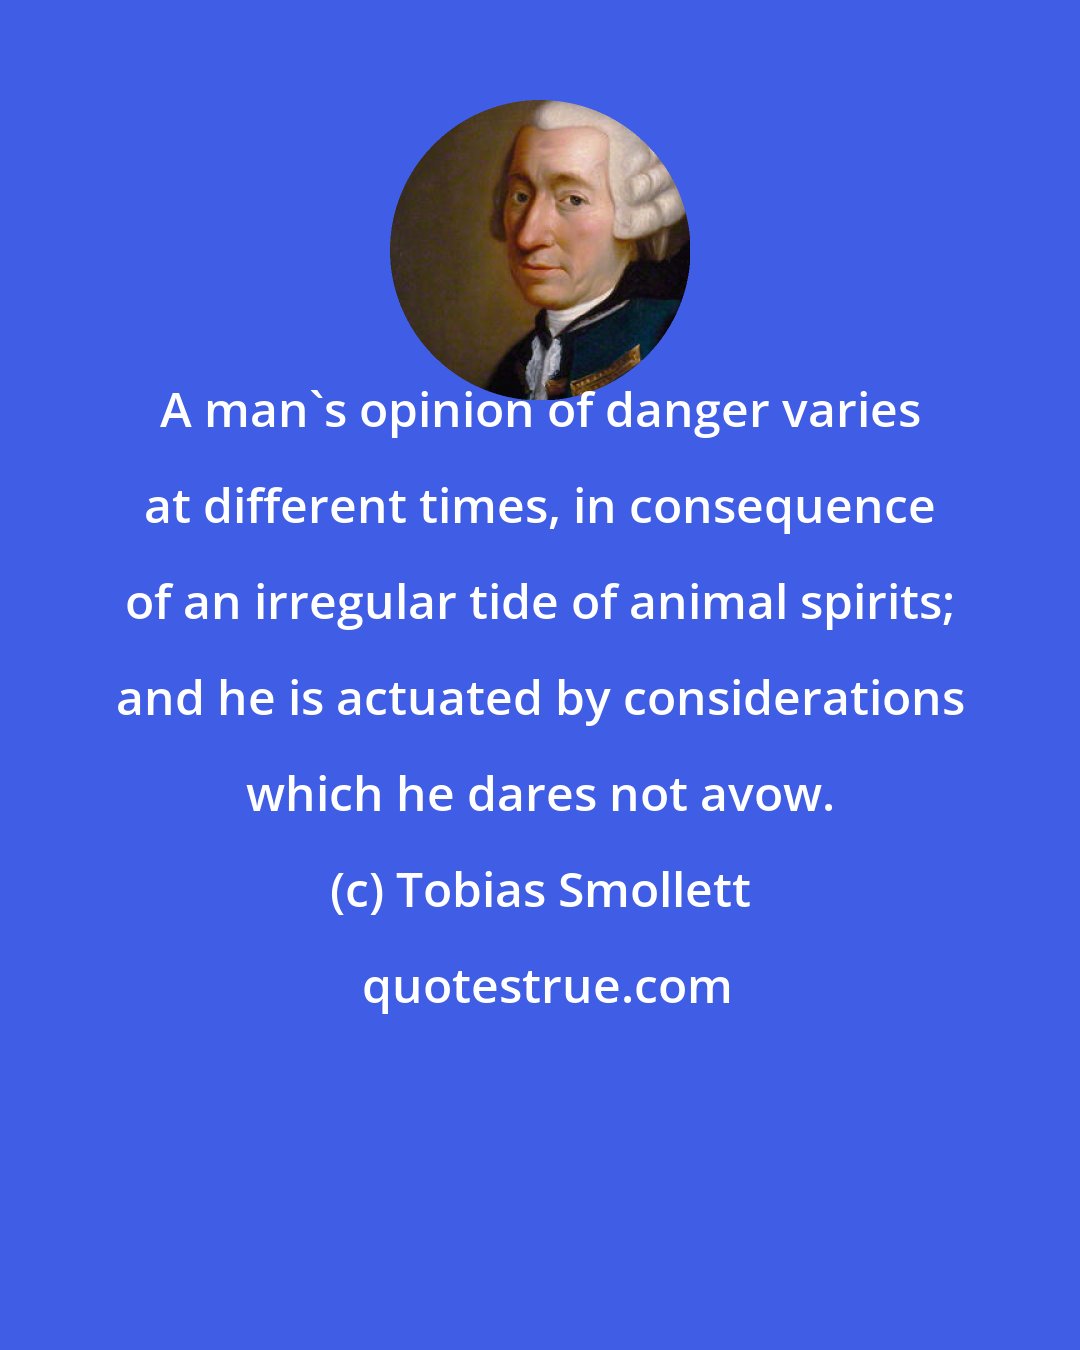 Tobias Smollett: A man's opinion of danger varies at different times, in consequence of an irregular tide of animal spirits; and he is actuated by considerations which he dares not avow.